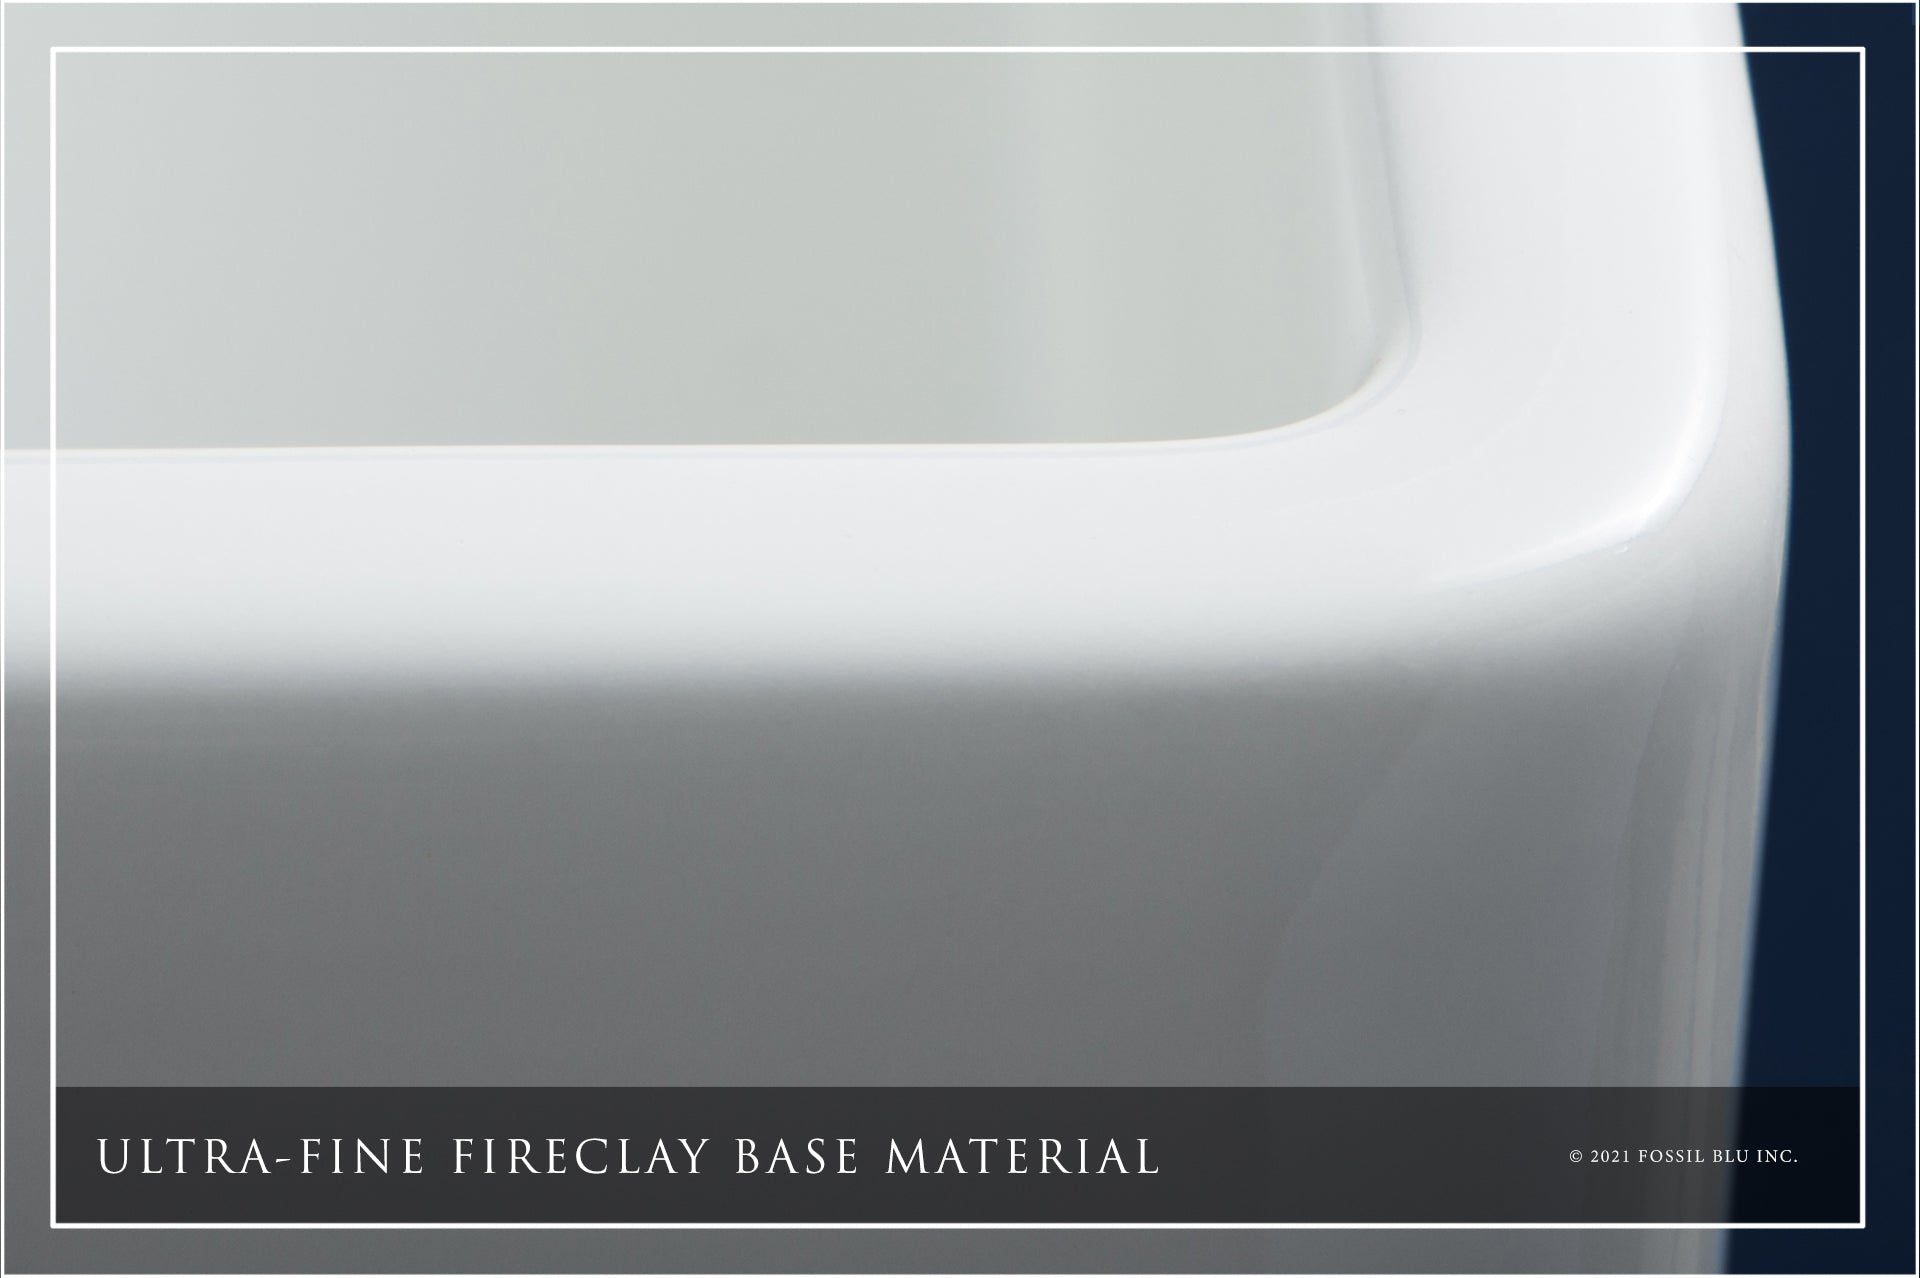 FSW1003 LUXURY 33-INCH SOLID FIRECLAY FARMHOUSE SINK IN WHITE, STAINLESS STEEL ACCS, FLAT FRONT